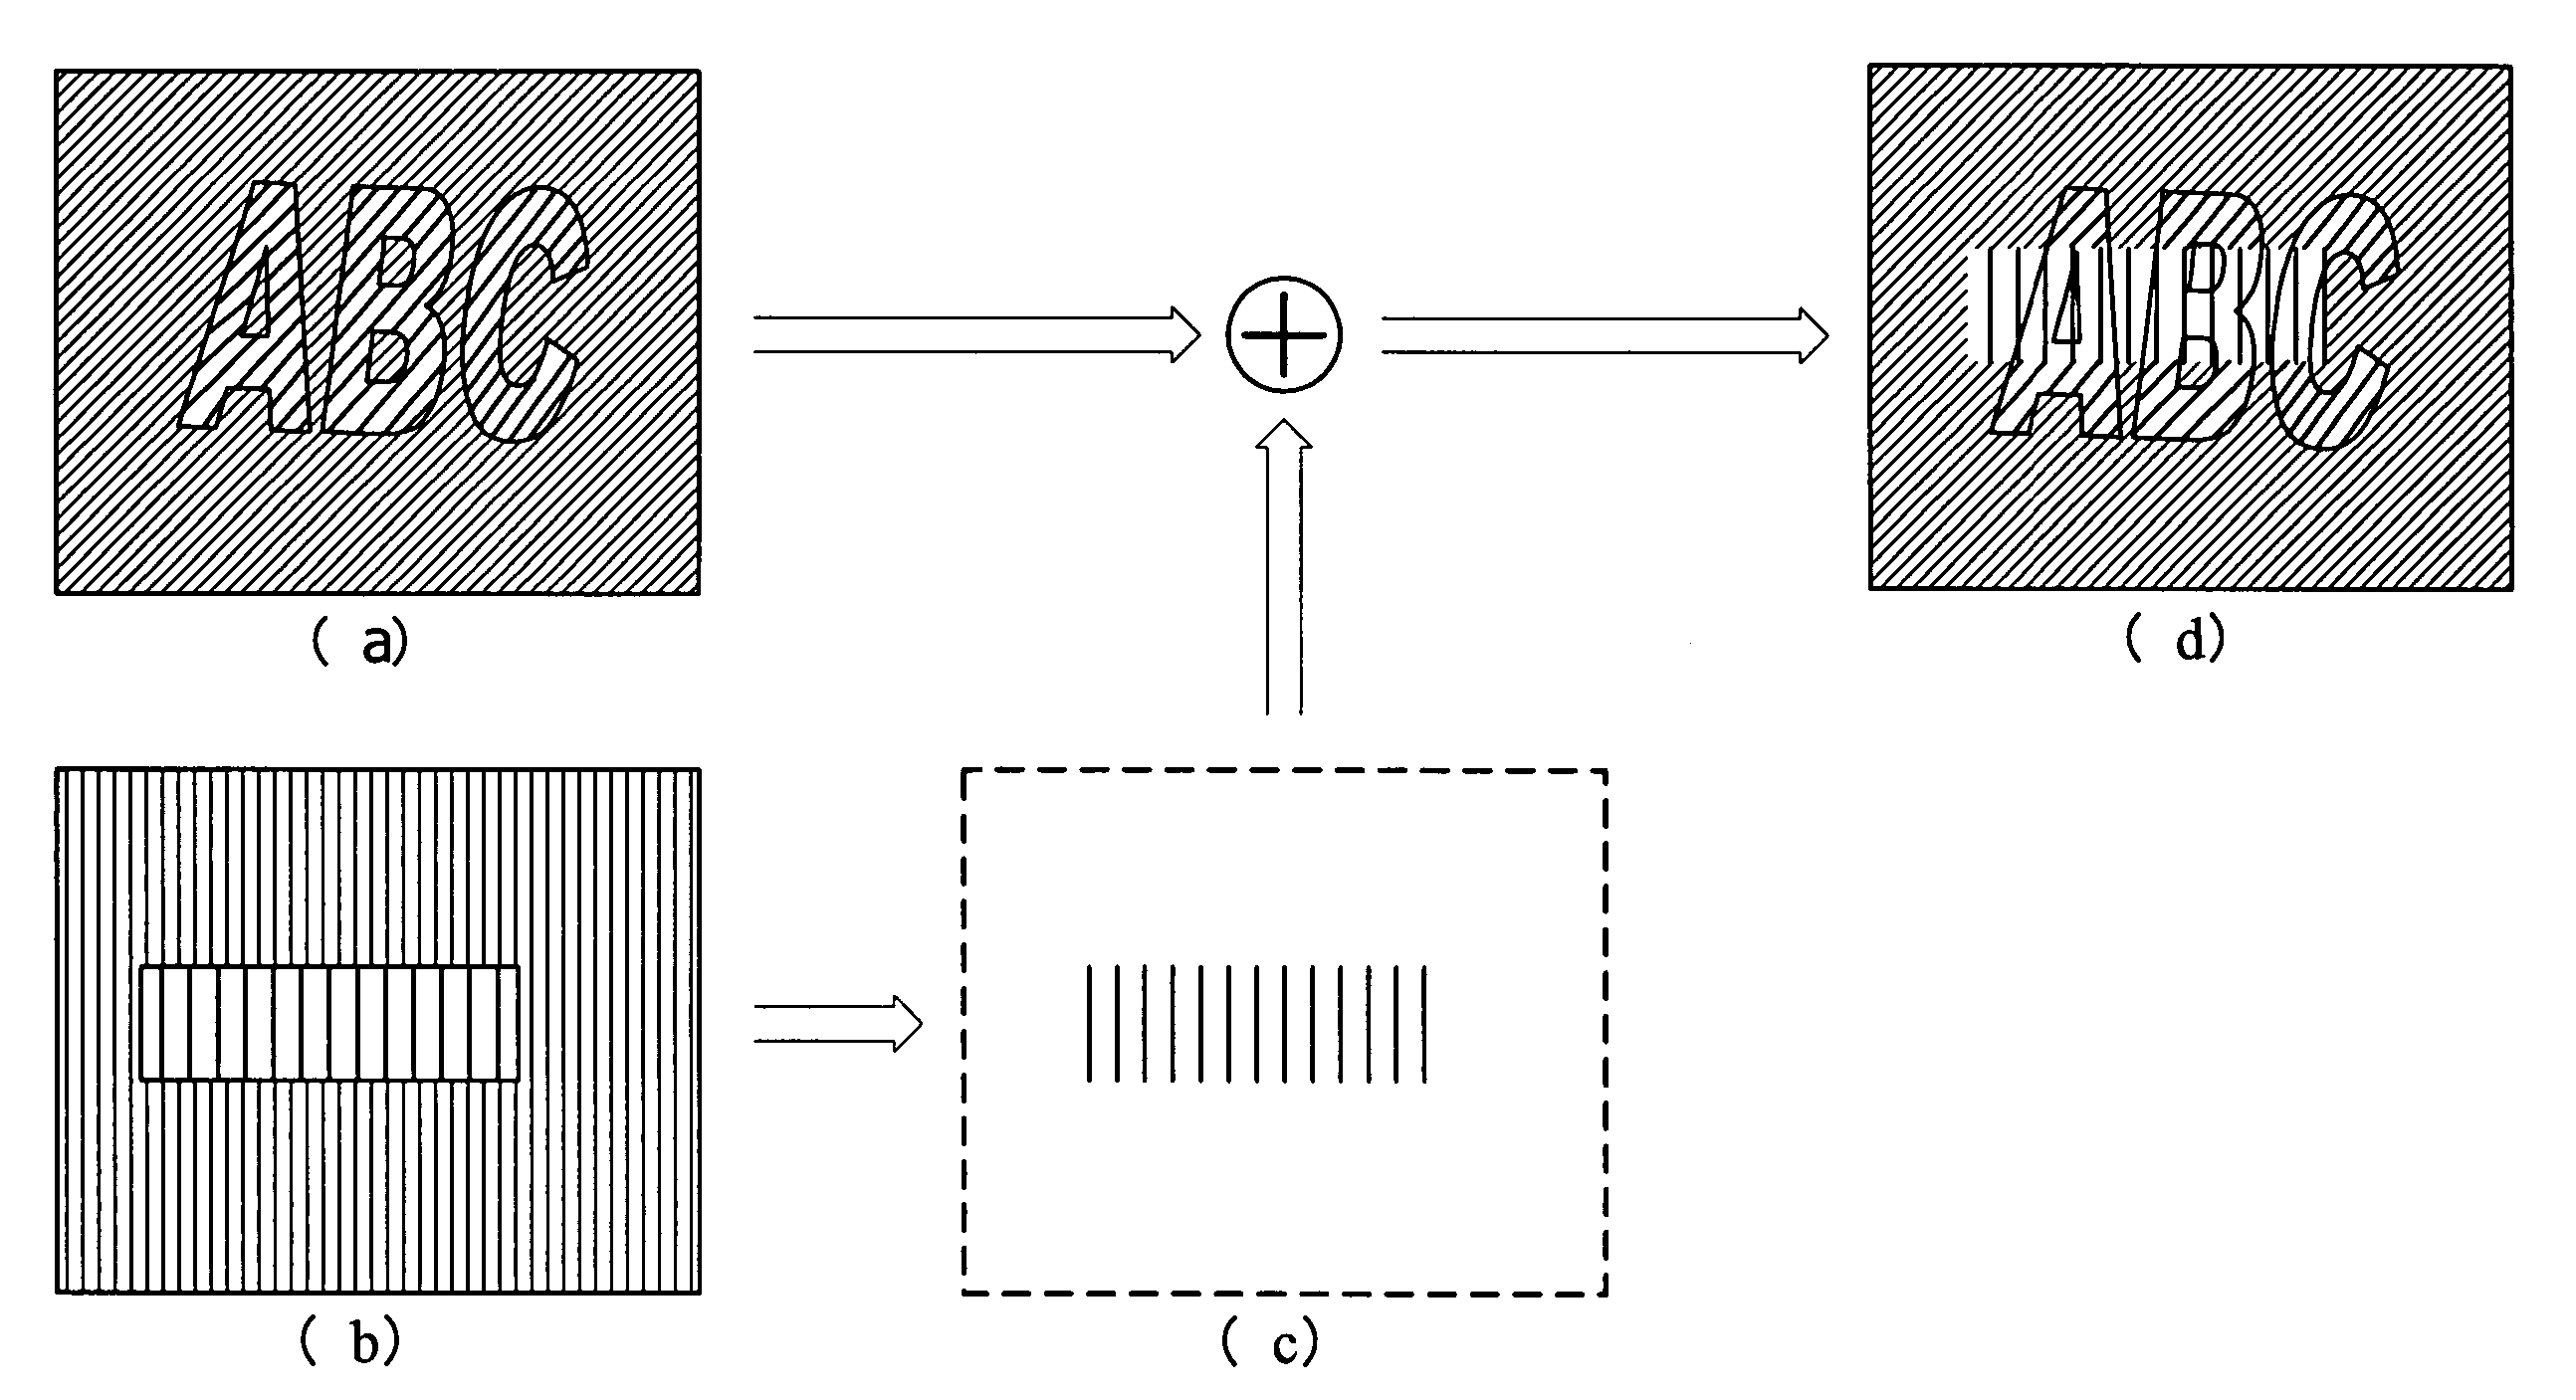 Device, system and method for realizing on screen display translucency